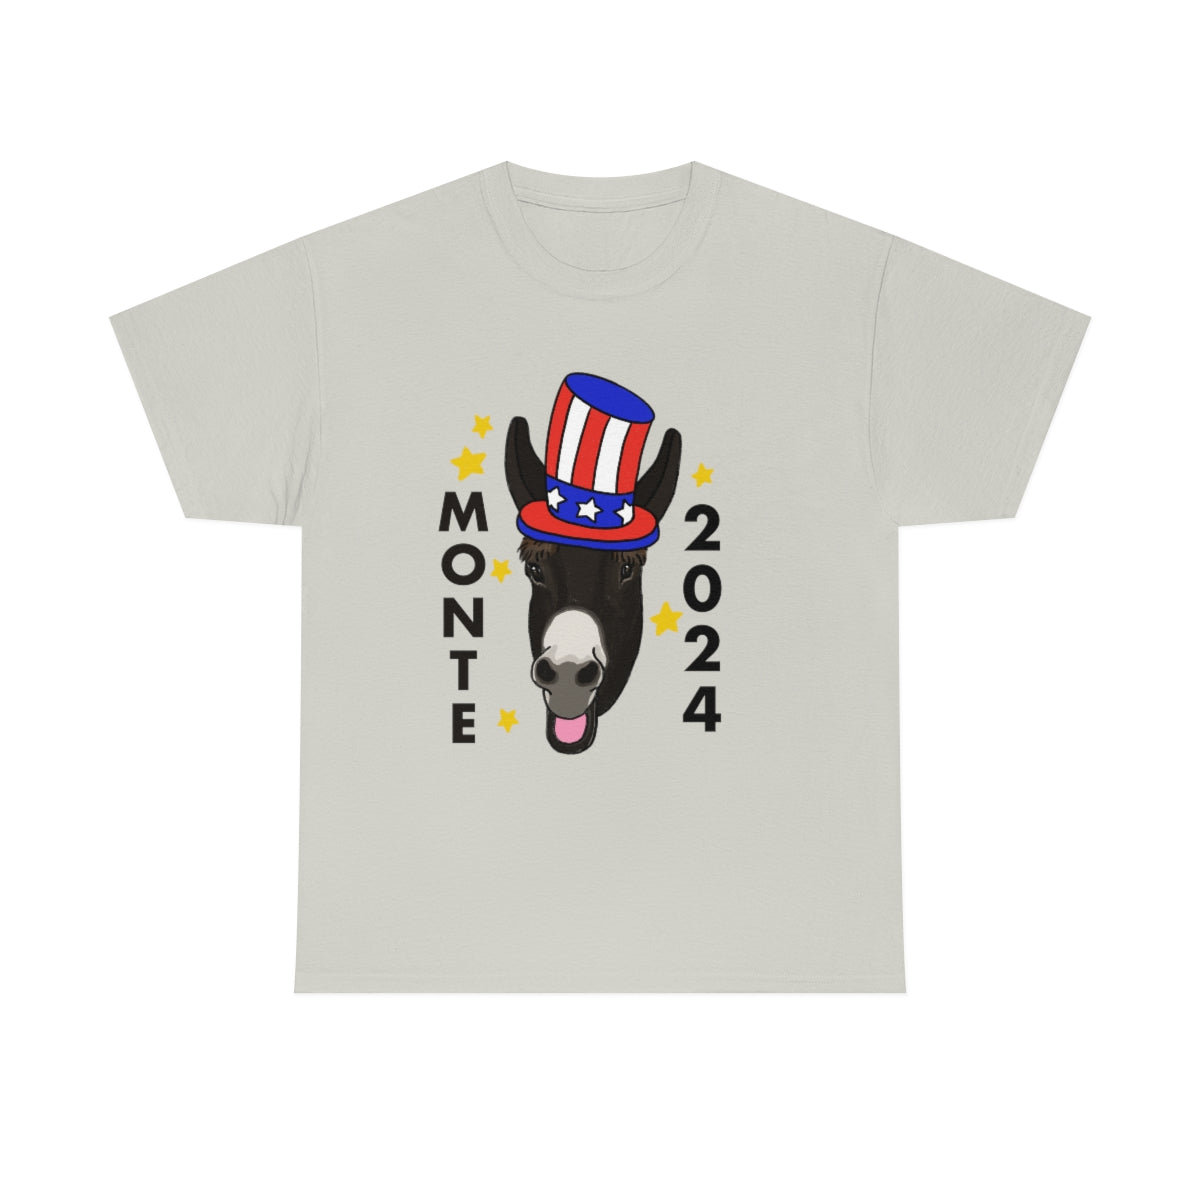 Monte the Singing Donkey for President Tees!